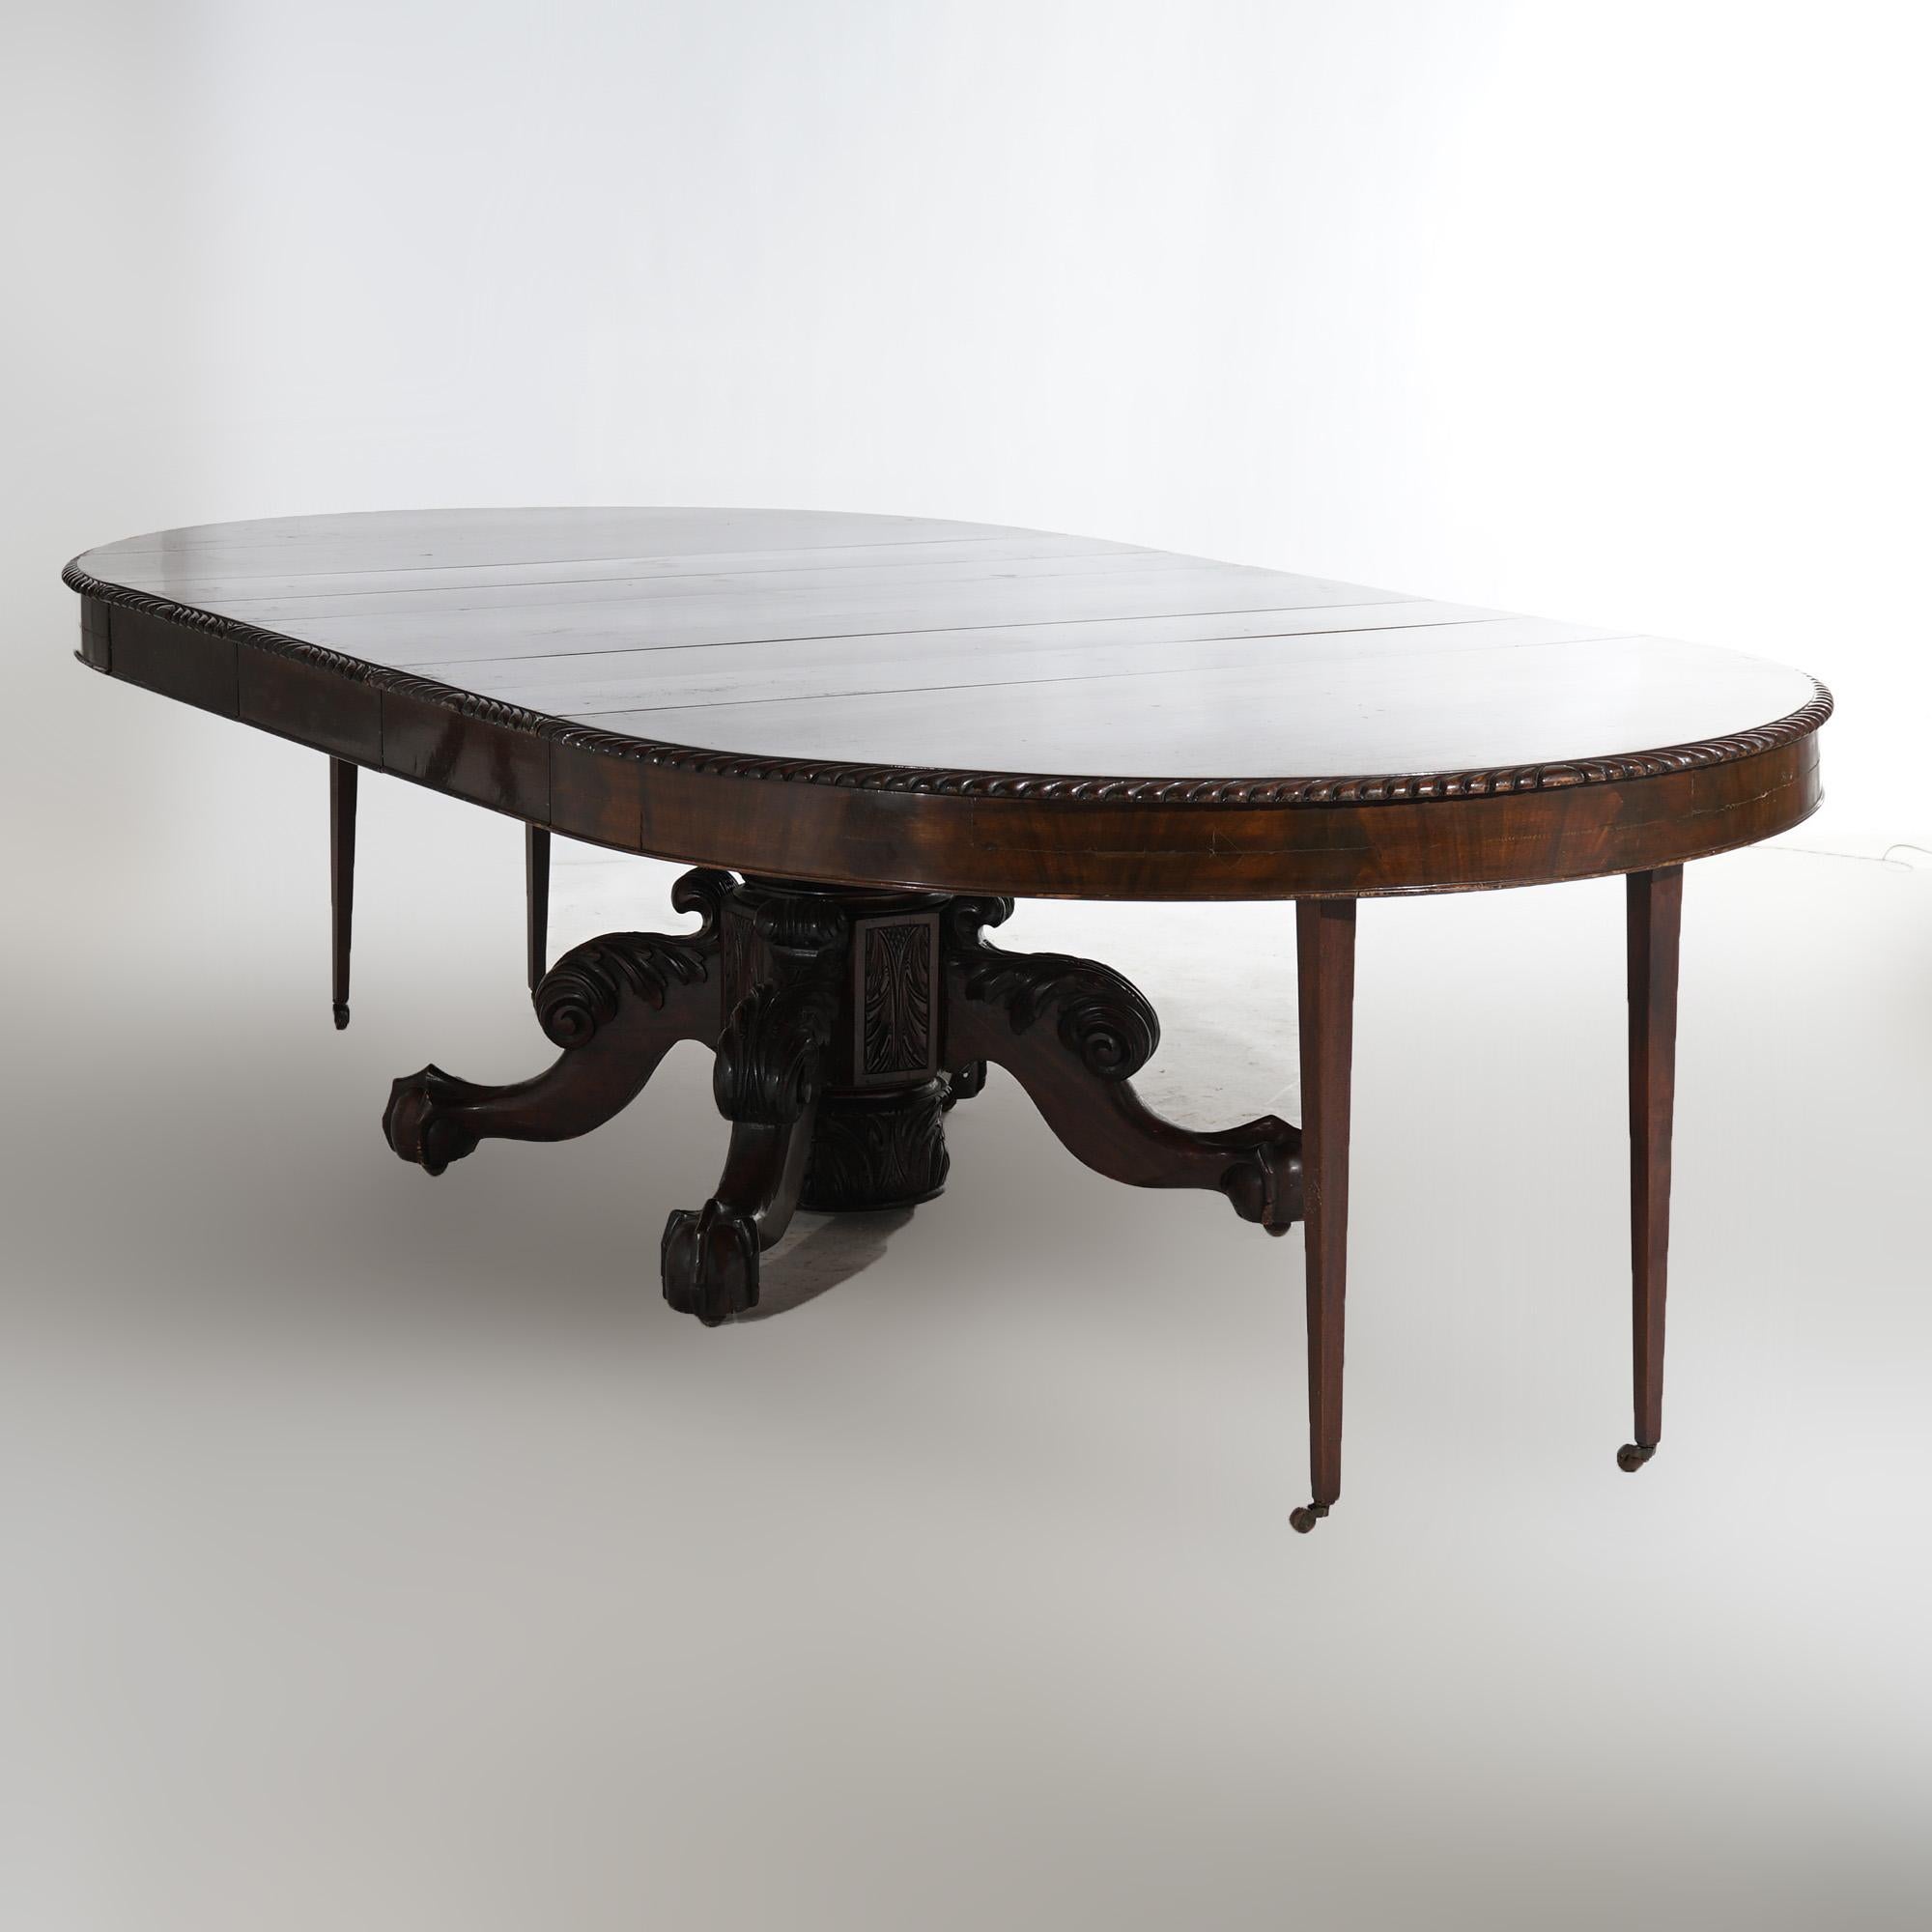 Antique Neoclassical Empire Carved Flame Mahogany 60” Dining Table & Four Leaves For Sale 10